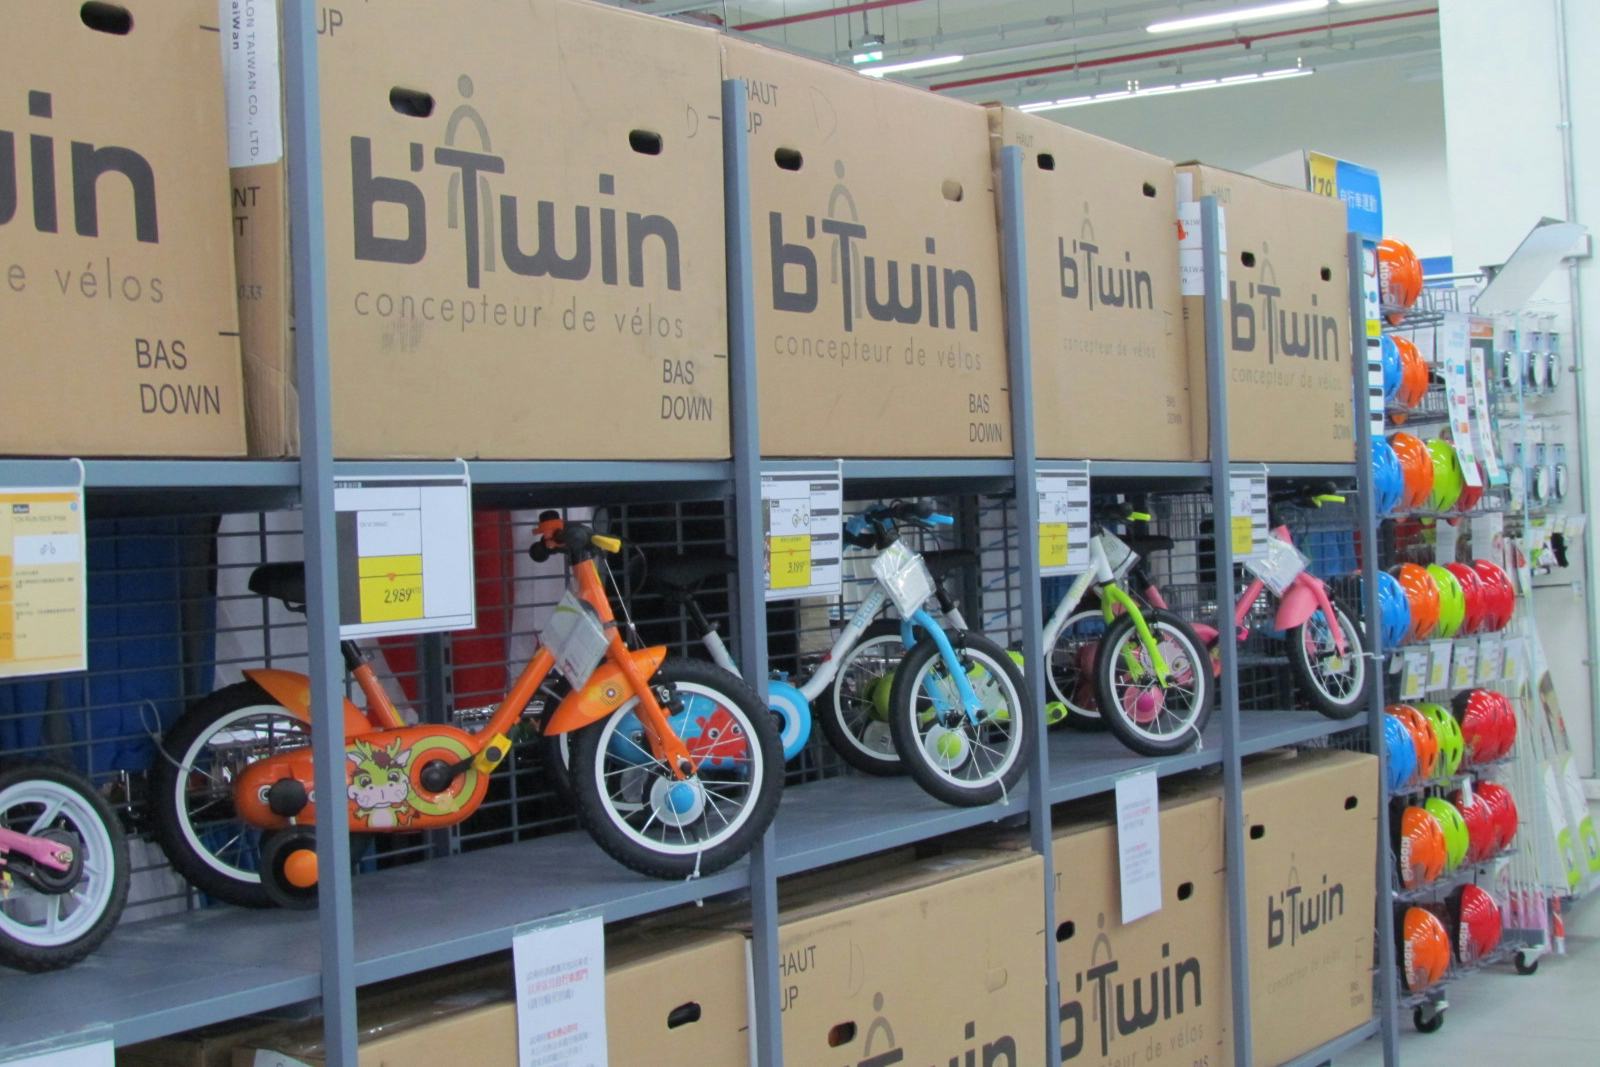 The world’s biggest retailer in sporting goods (including bikes) is investing USD130m in opening up a retail chain in India.